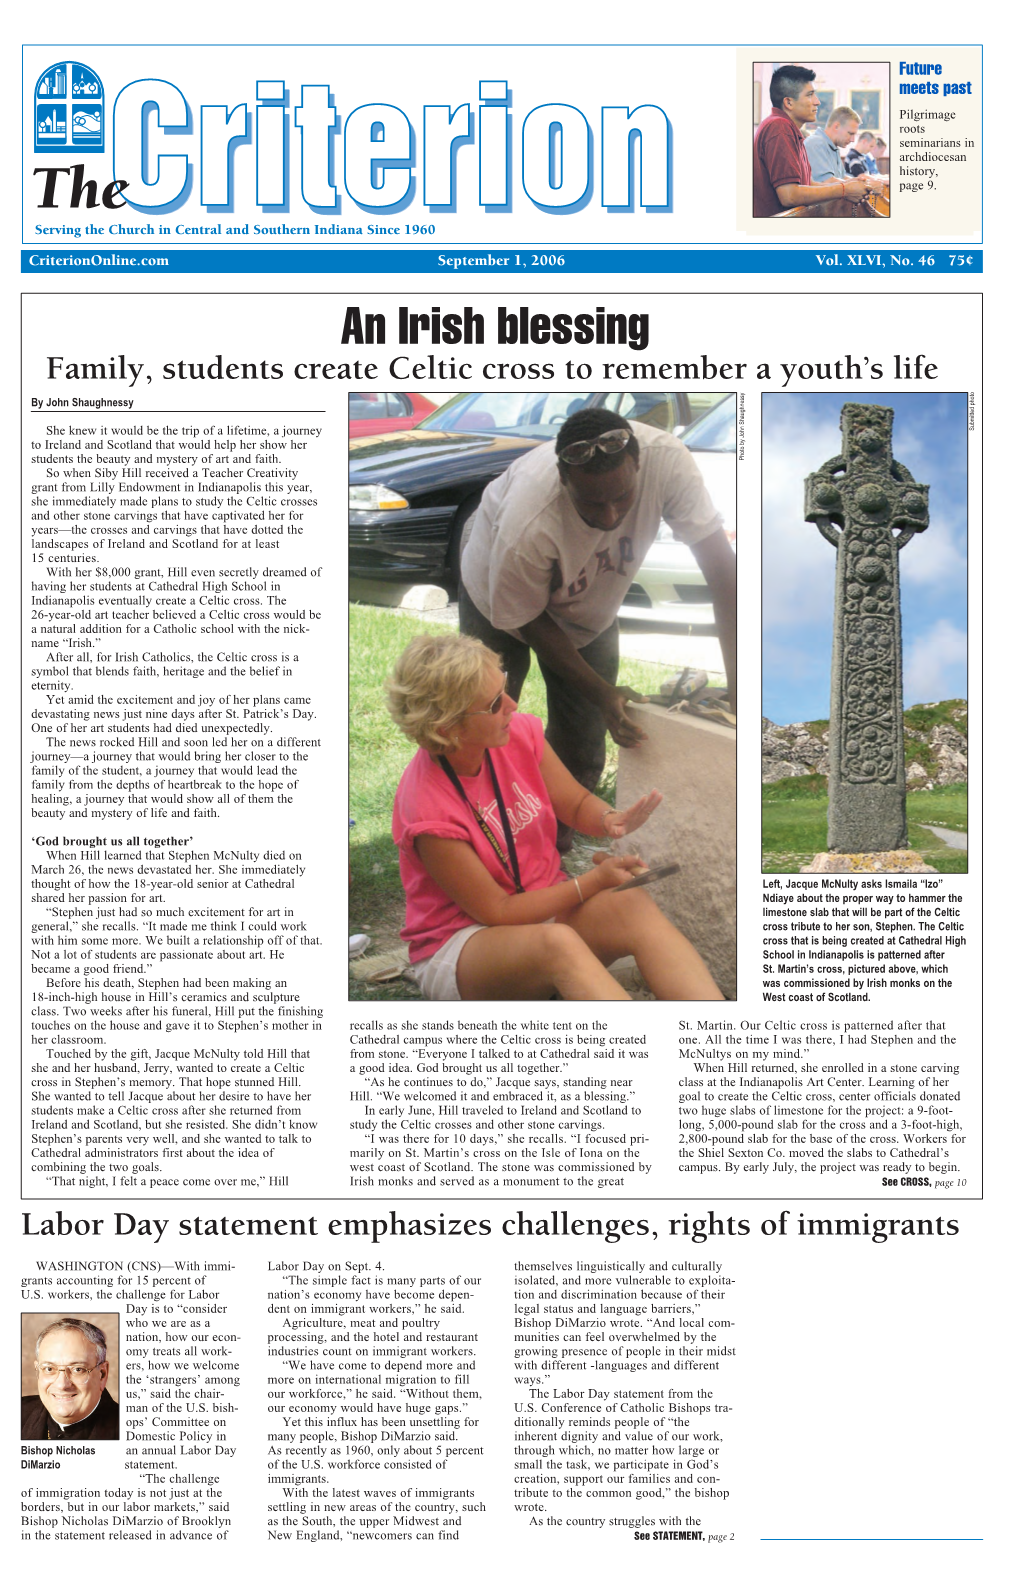 An Irish Blessing Family, Students Create Celtic Cross to Remember a Youth’S Life by John Shaughnessy